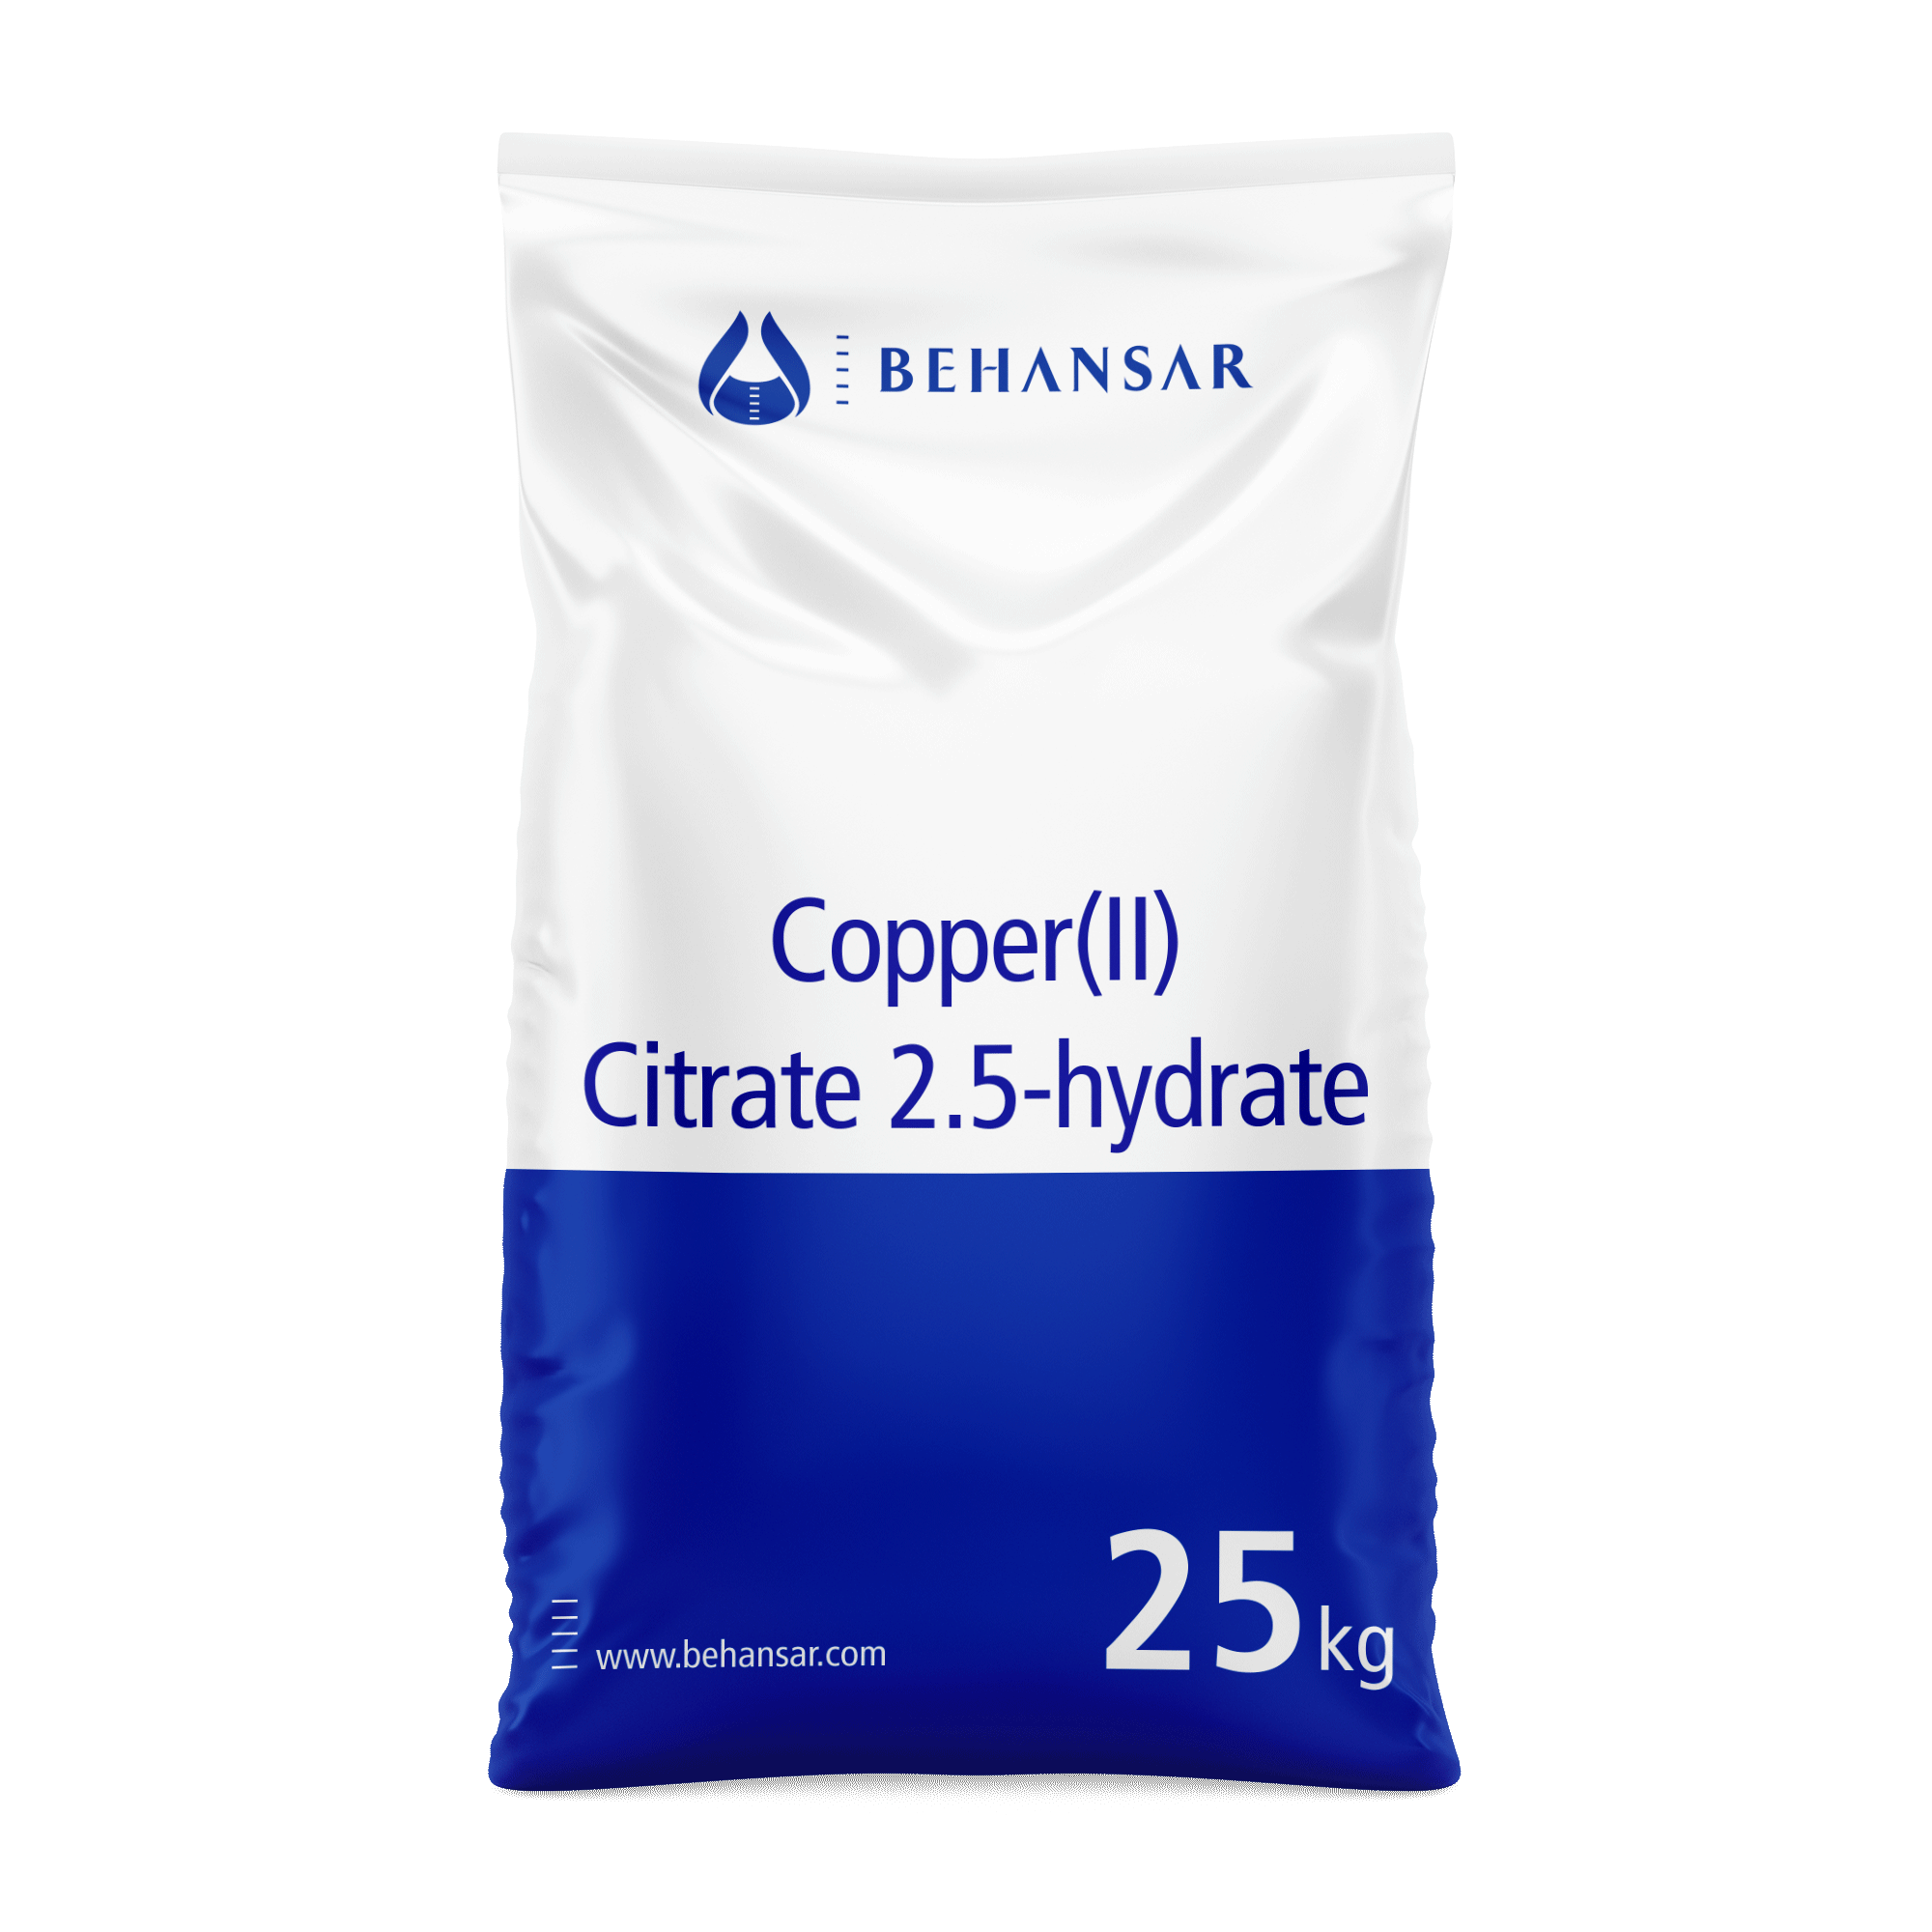 Copper(II) Citrate 2.5-hydrate is one of the products of Behansar Co